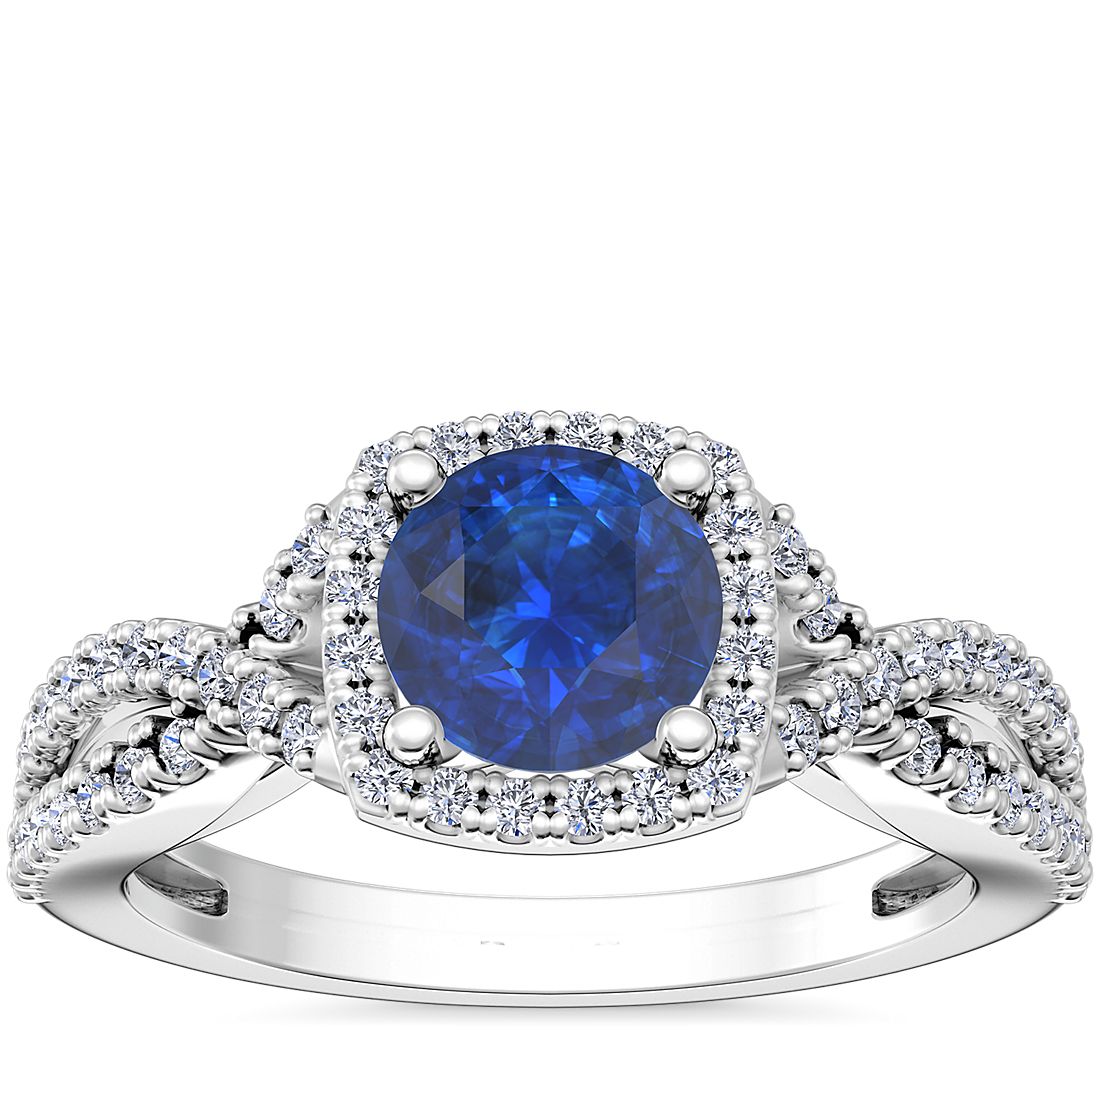 Twist Halo Diamond Engagement Ring with Round Sapphire in 14k White Gold (6mm)